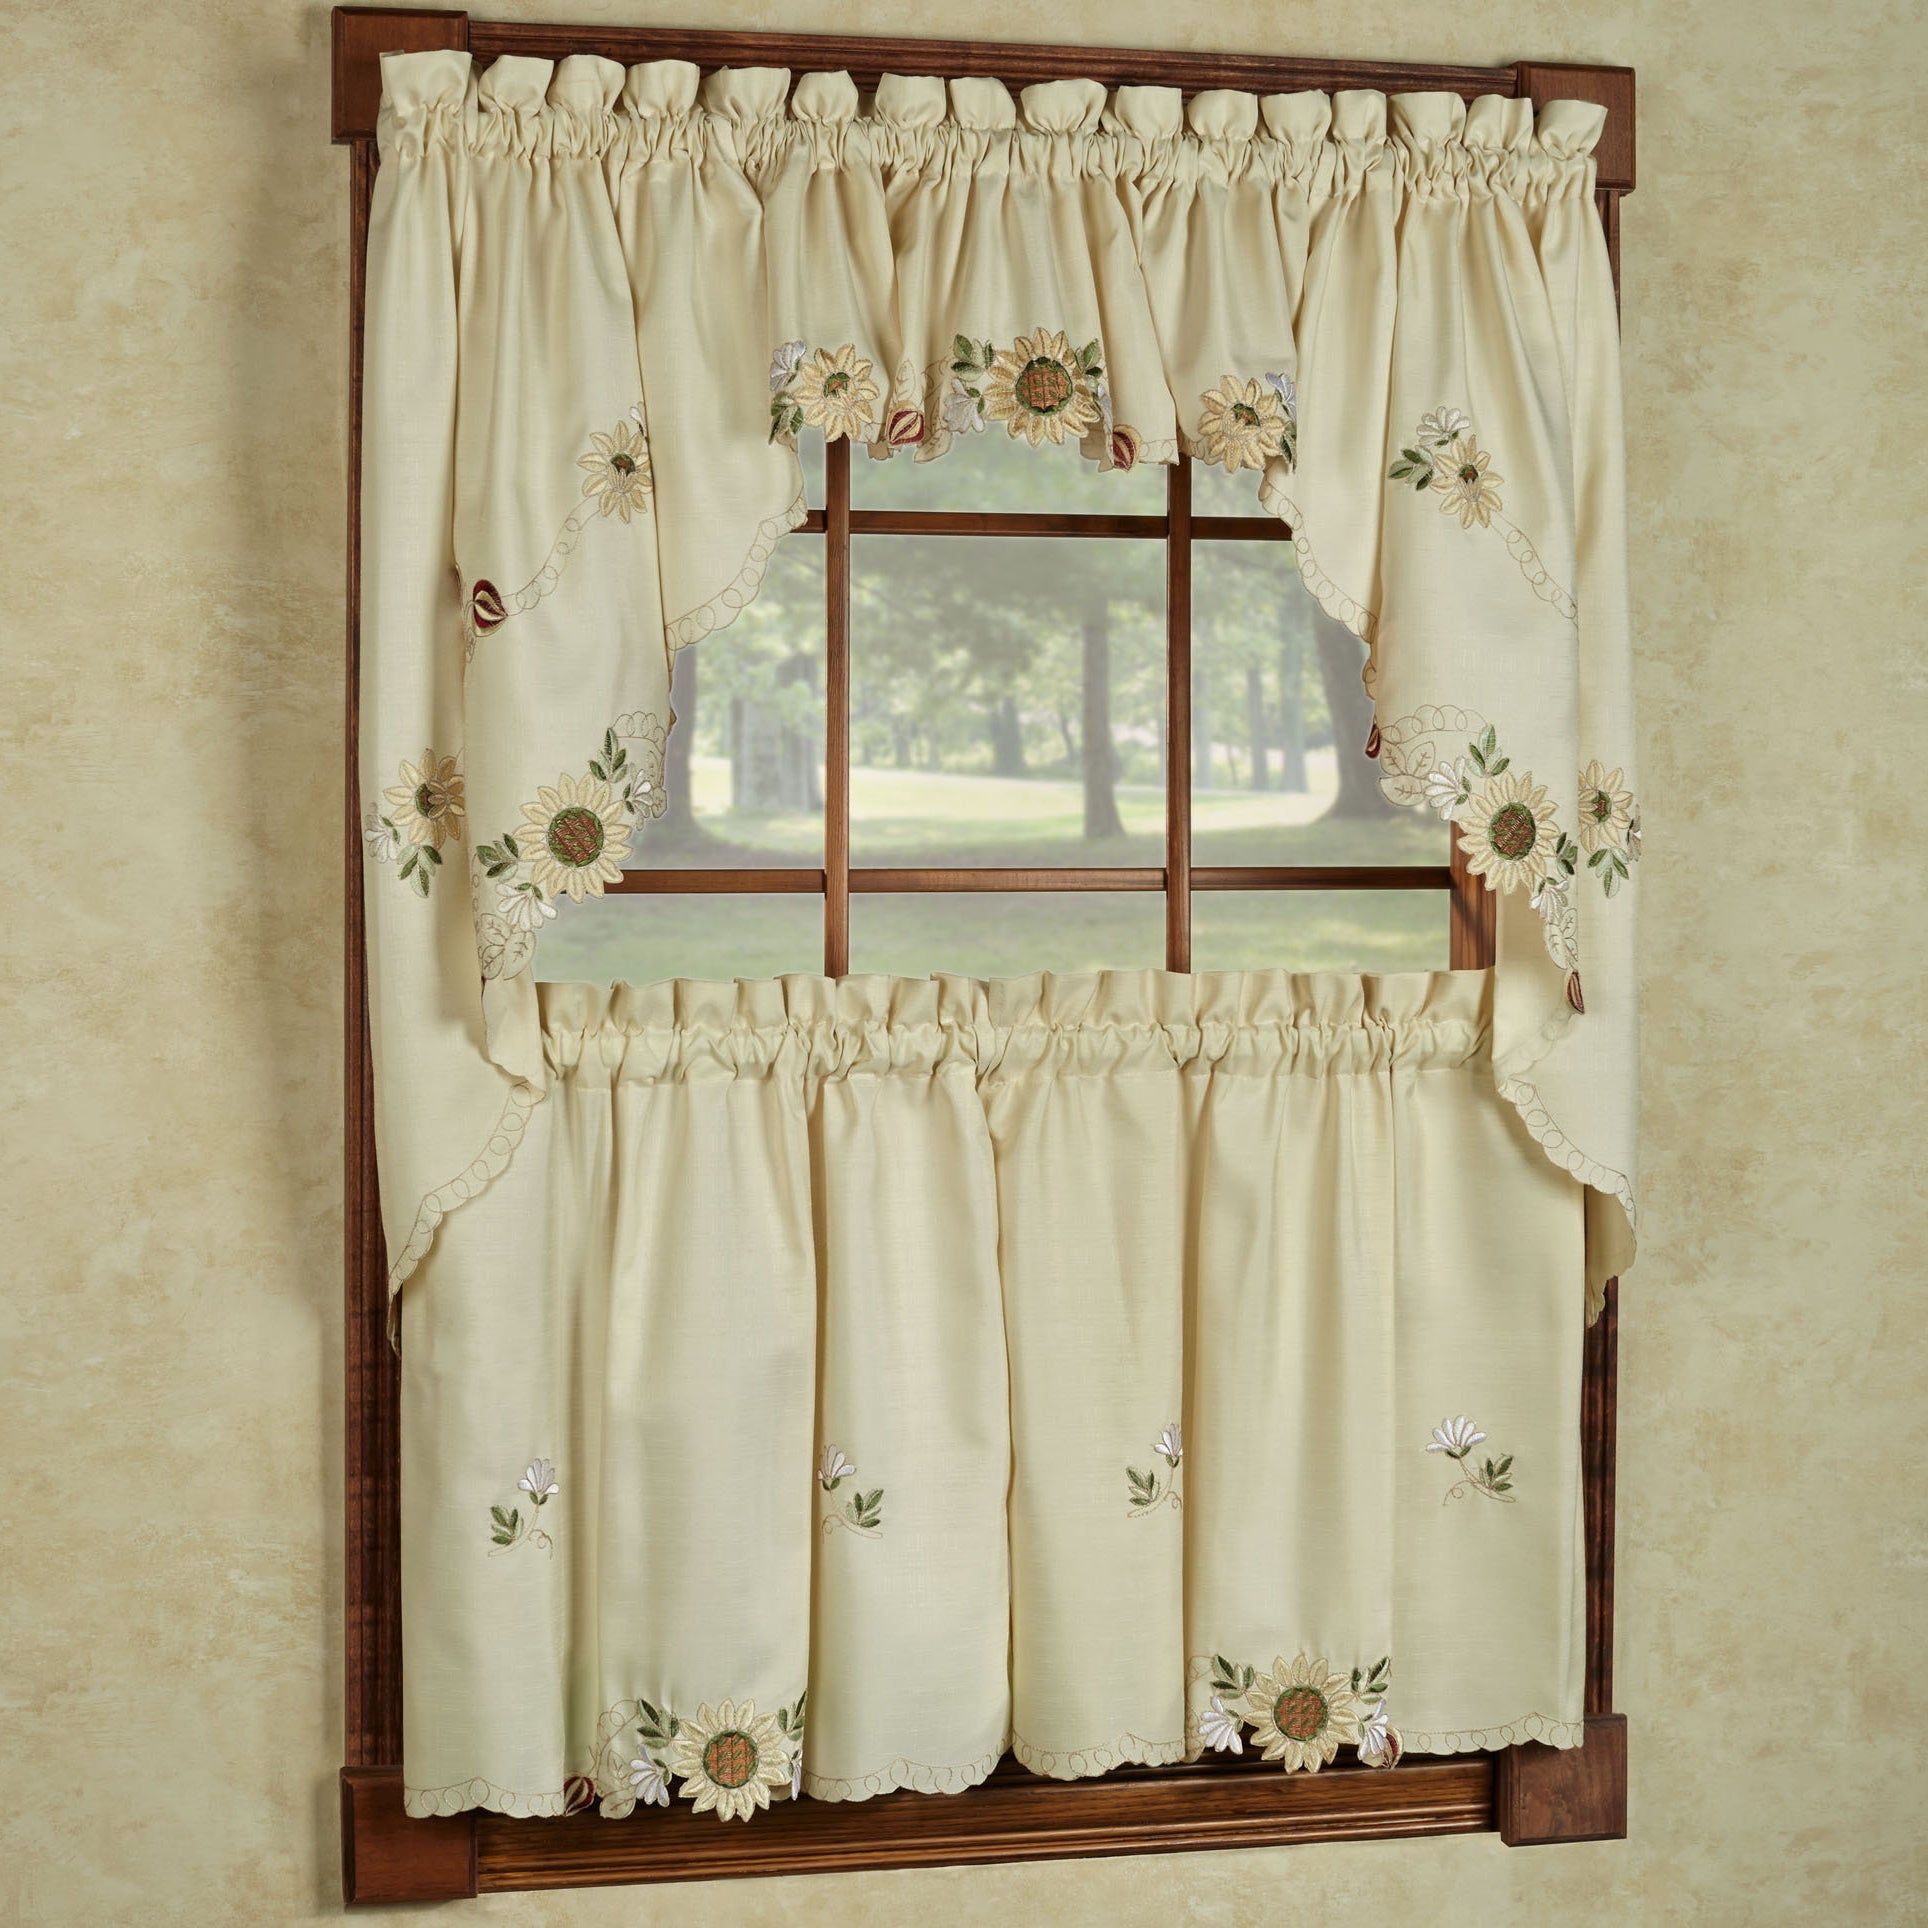 Embroidered Sunflower Kitchen Curtains Separates Tier Swag And Valance Options Overstock Shopping The Best Deals On Valances Intended For Sunflower Cottage Kitchen Curtain Tier And Valance Sets 